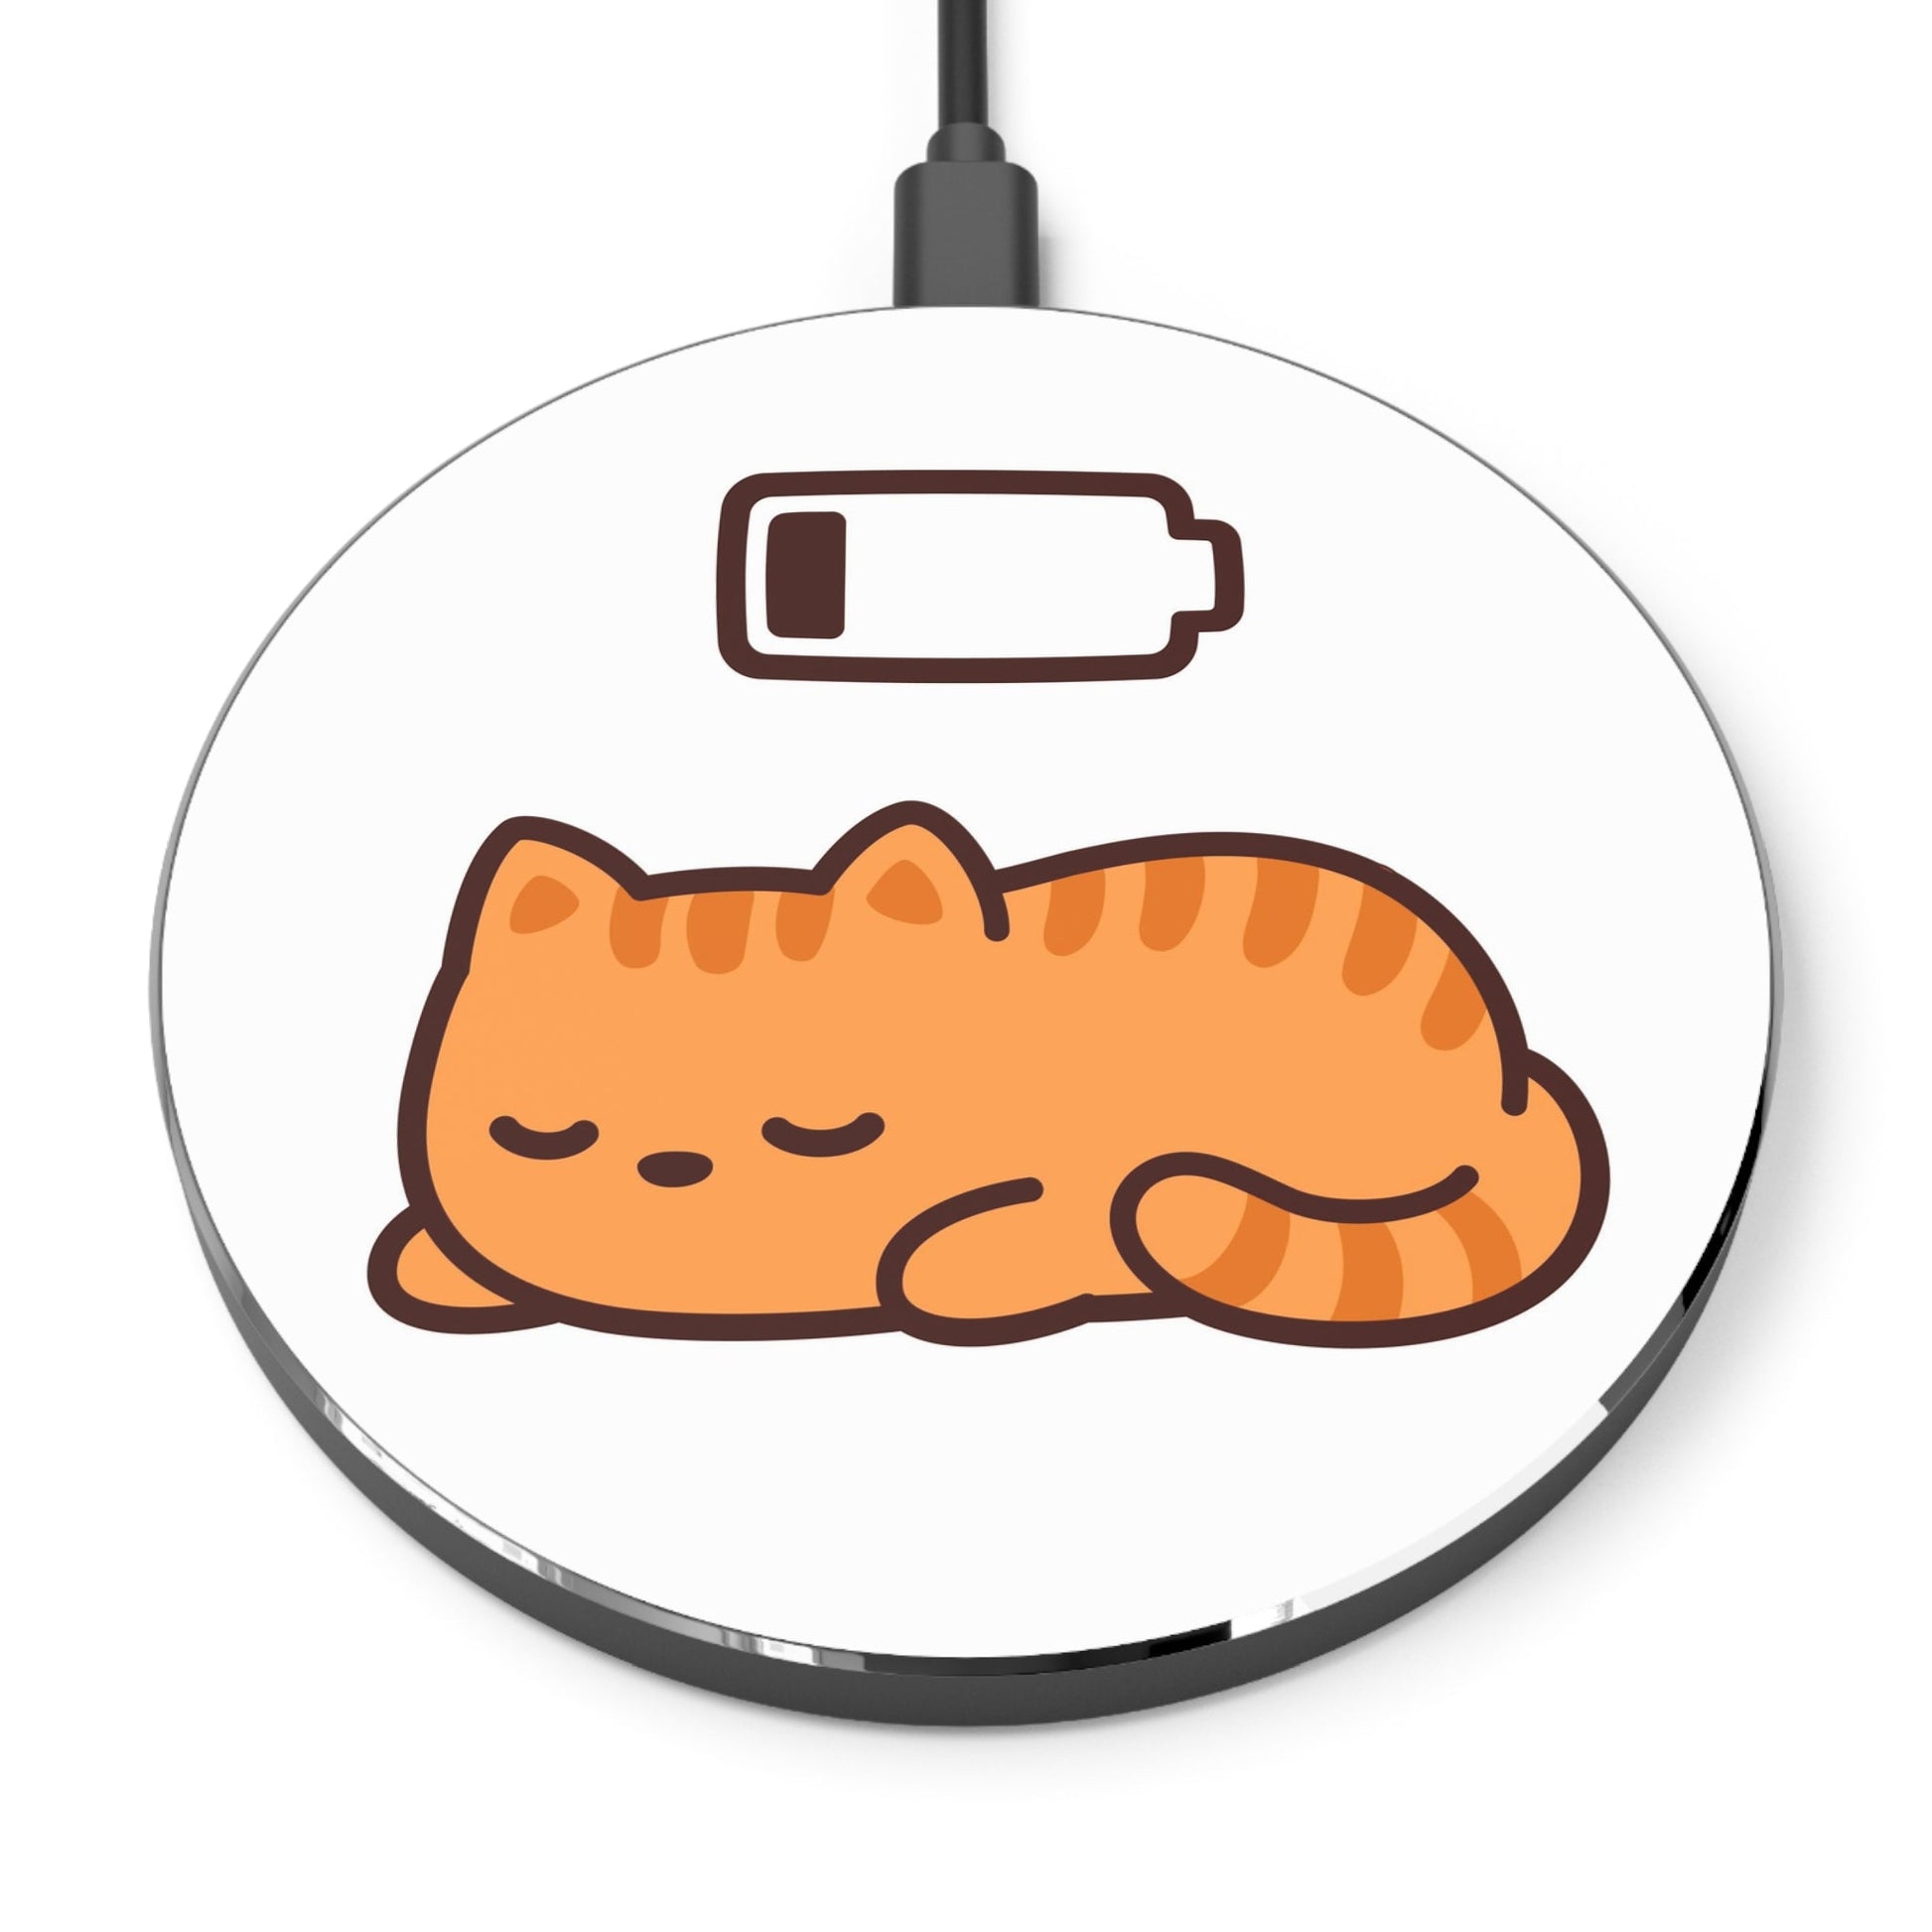 Kitty Recharge Wireless Charger - Accessories - Epileptic Al’s Shop